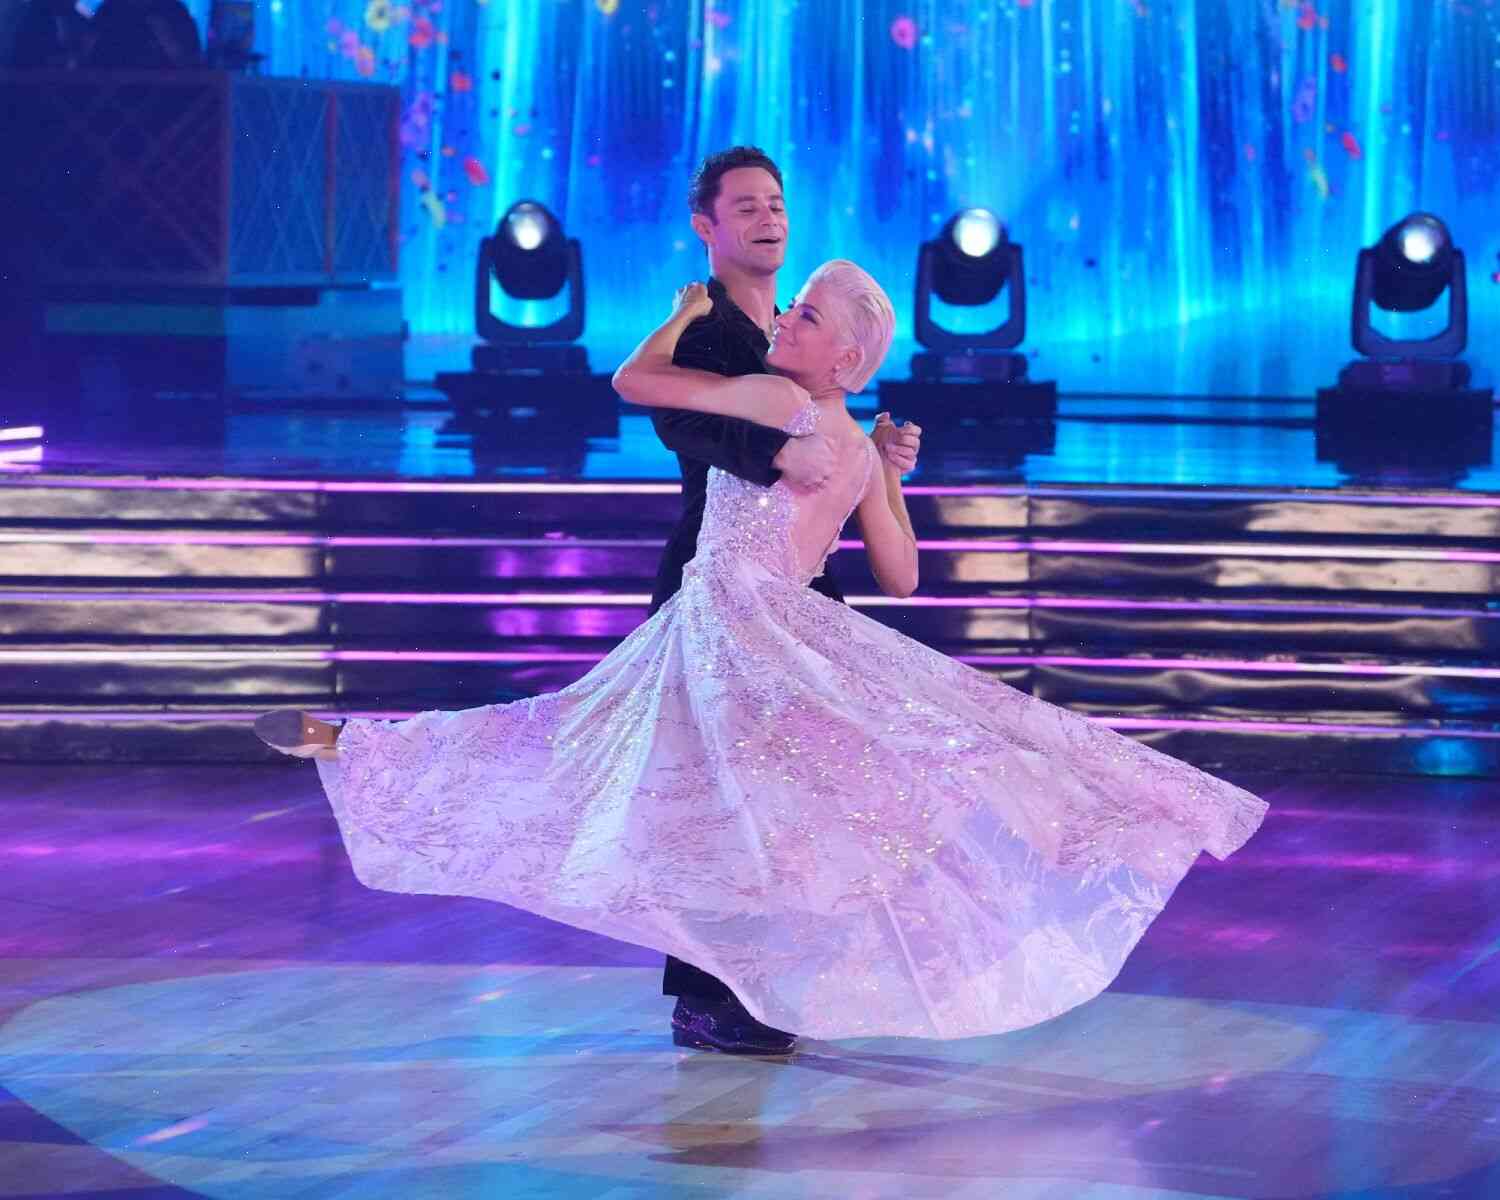 Dancing With The Stars may be forced to cancel its fall finale